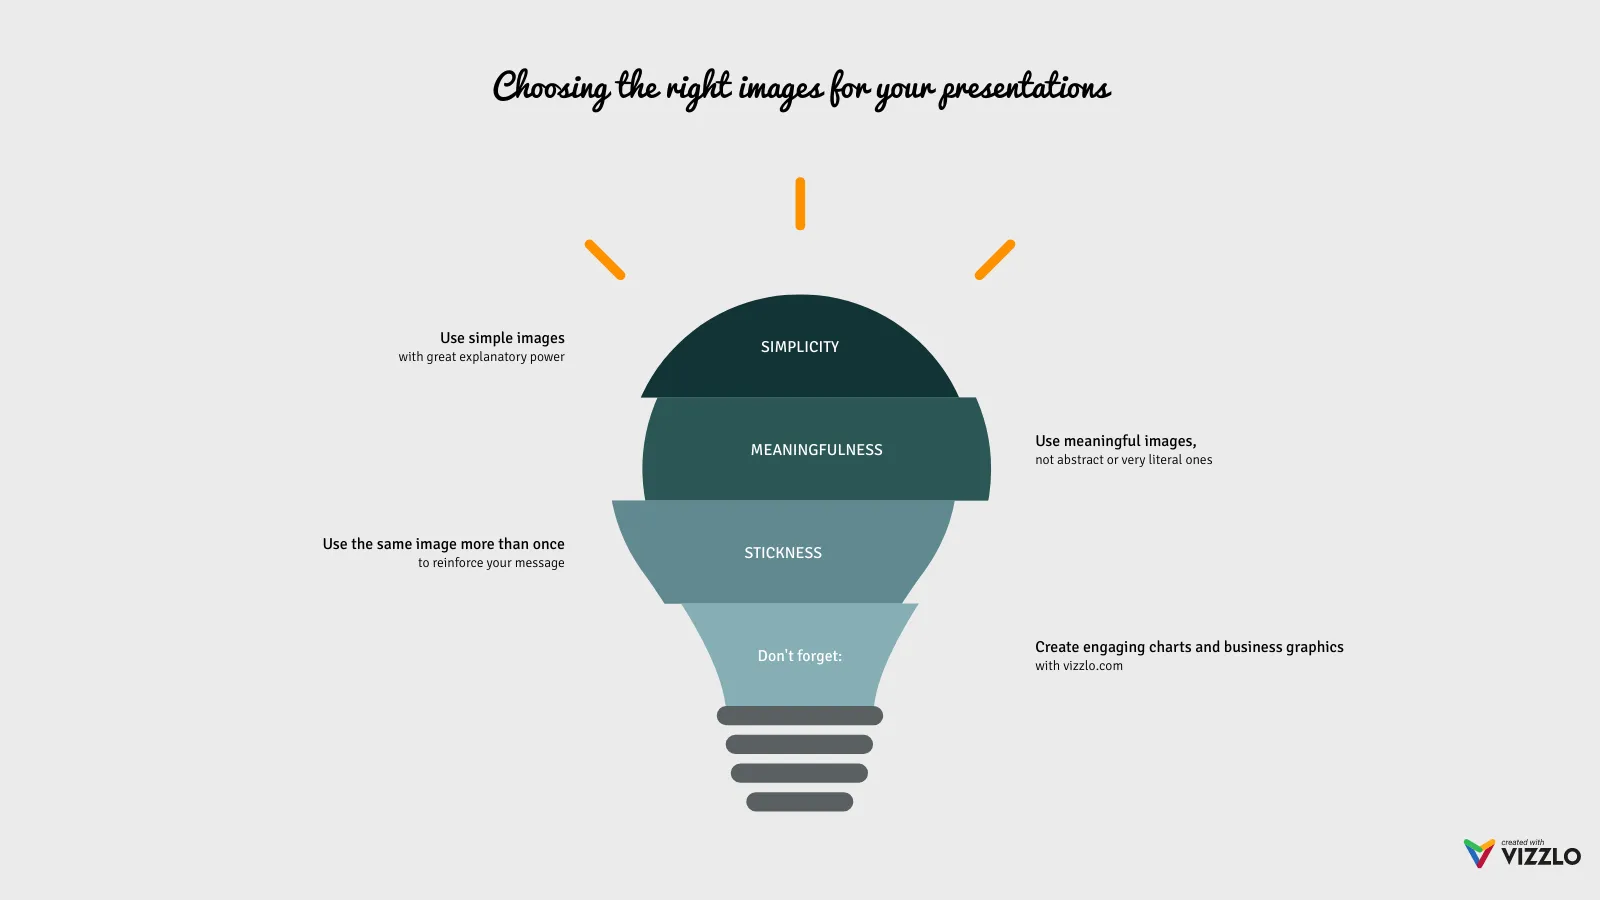 Idea Chart example: Choosing the right images for your presentations